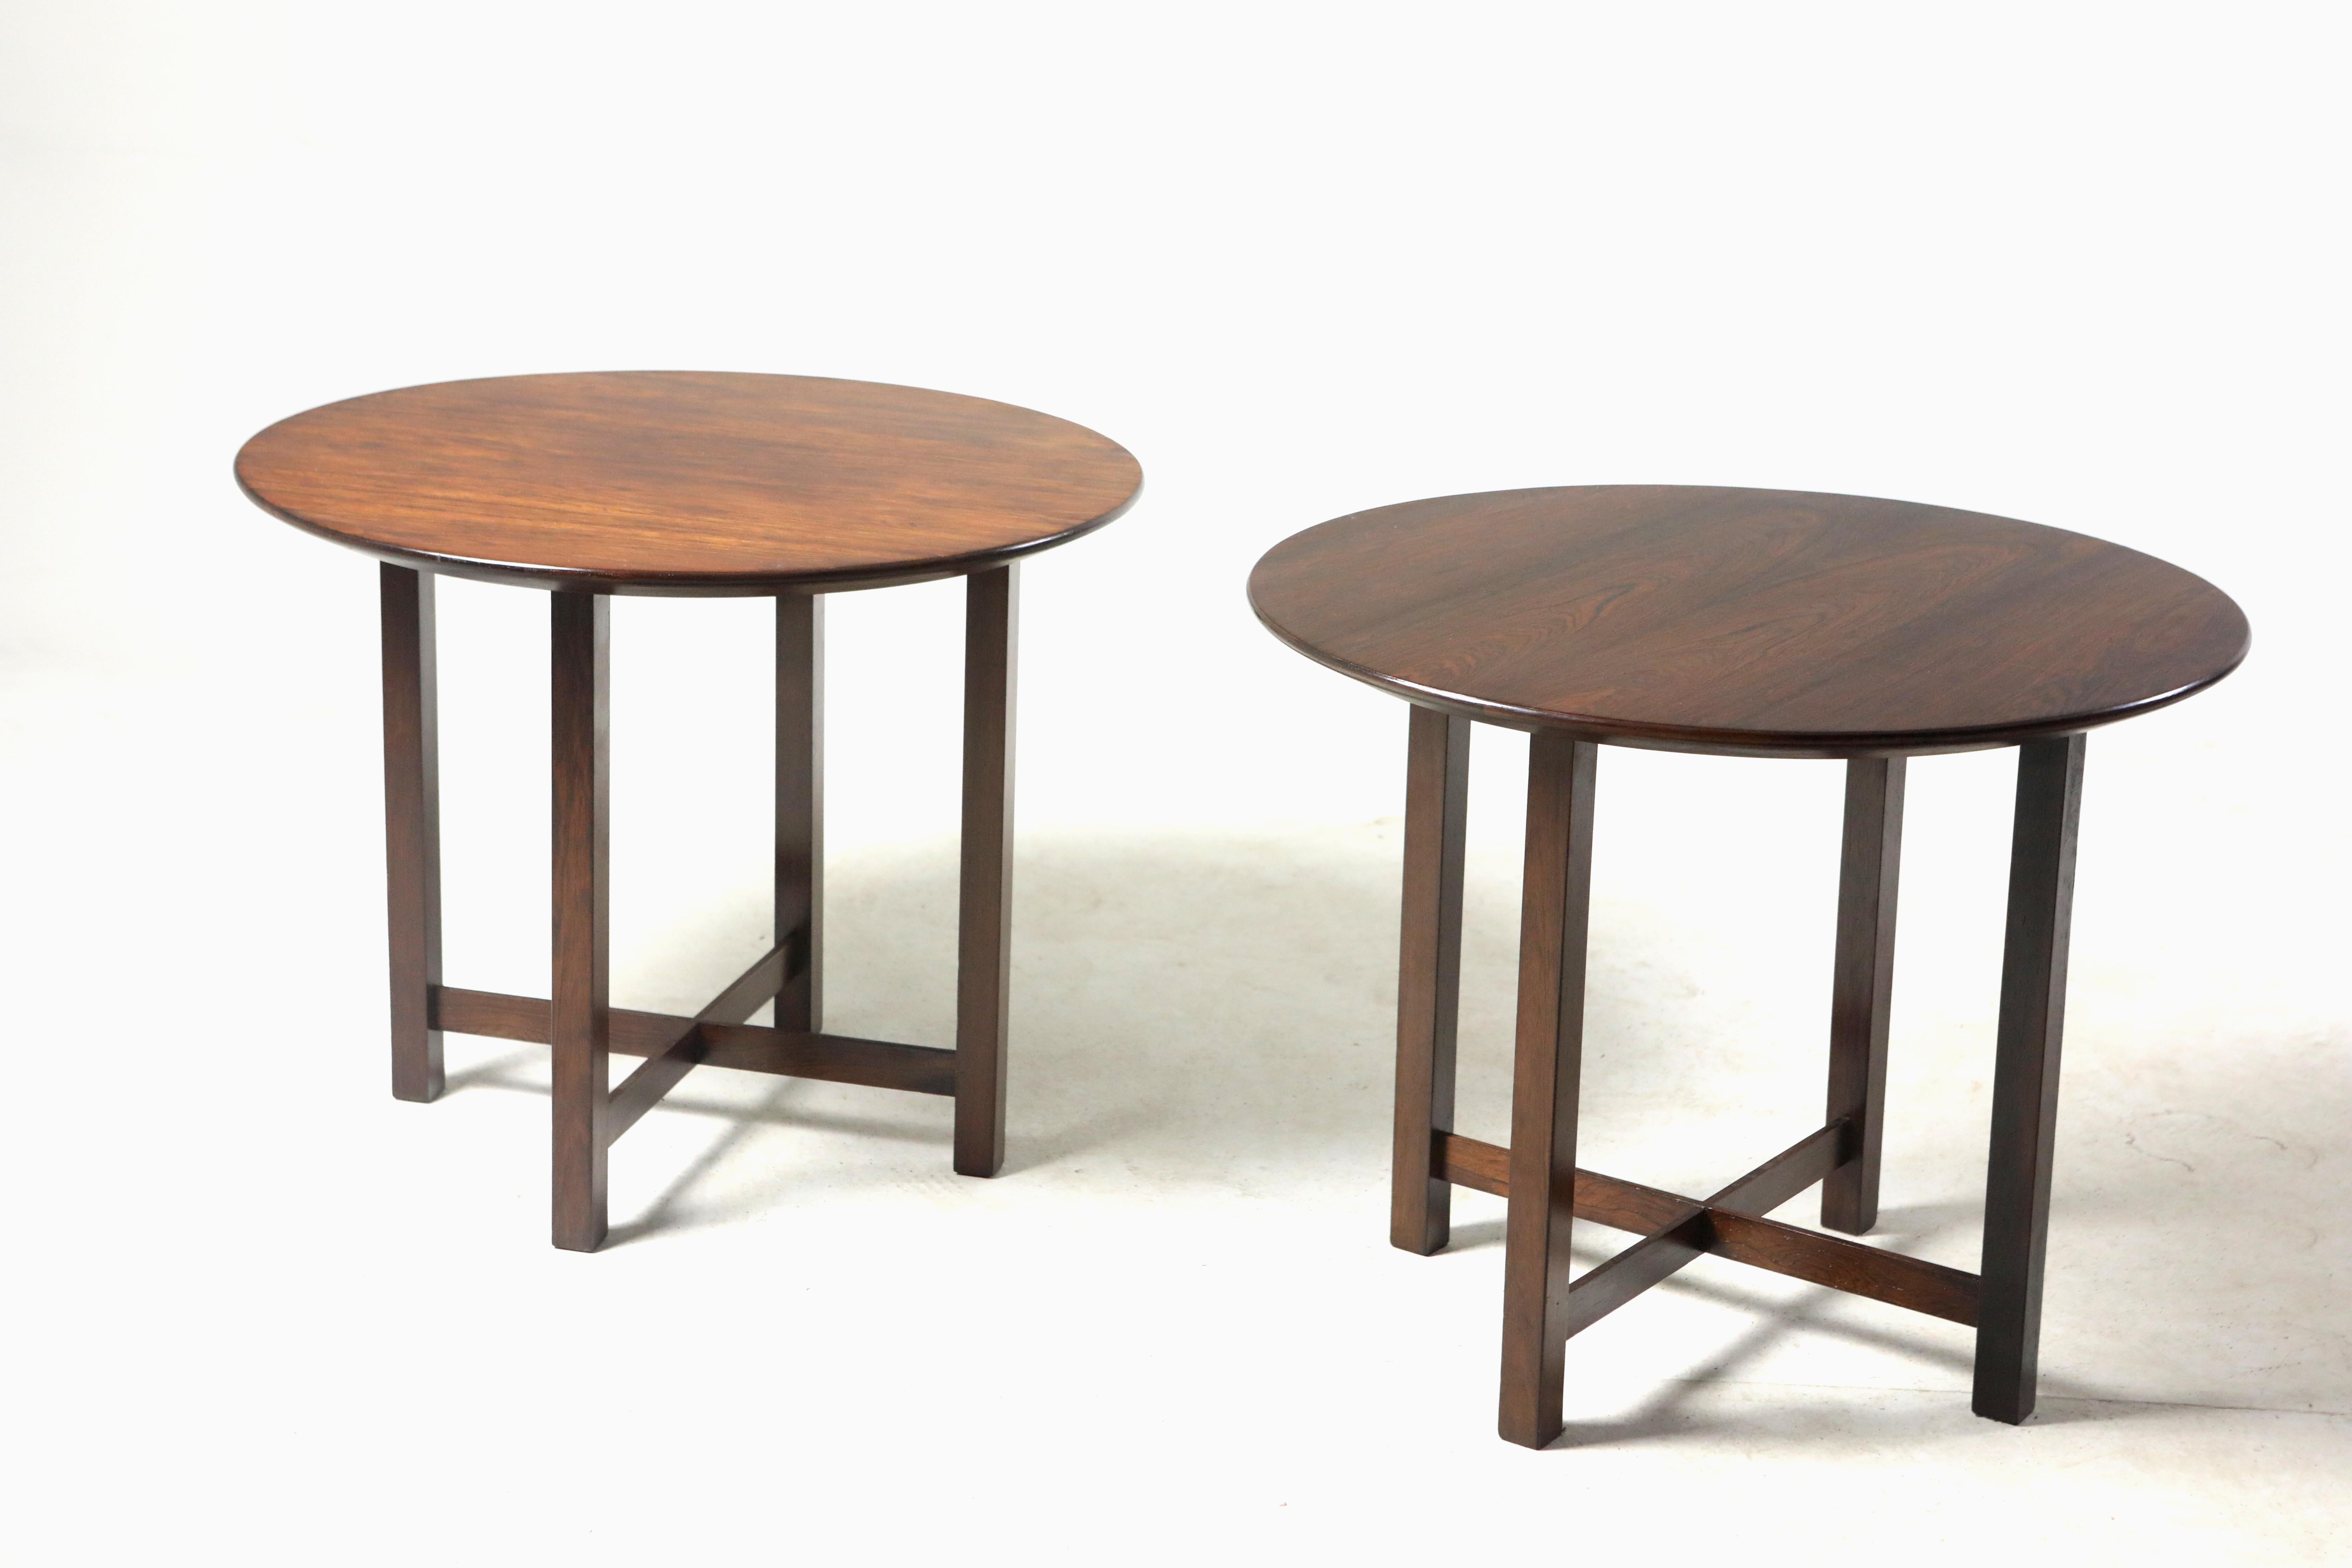 Pair of Mid-Century Modern Side Tables by Fatima Arquitetura, 1960s

This pair of side tables manufactured in the 1960s by Fatima Arquitetura in Brazil is a beautiful example of Mid-Century Modern design. Crafted in solid wood, these side tables